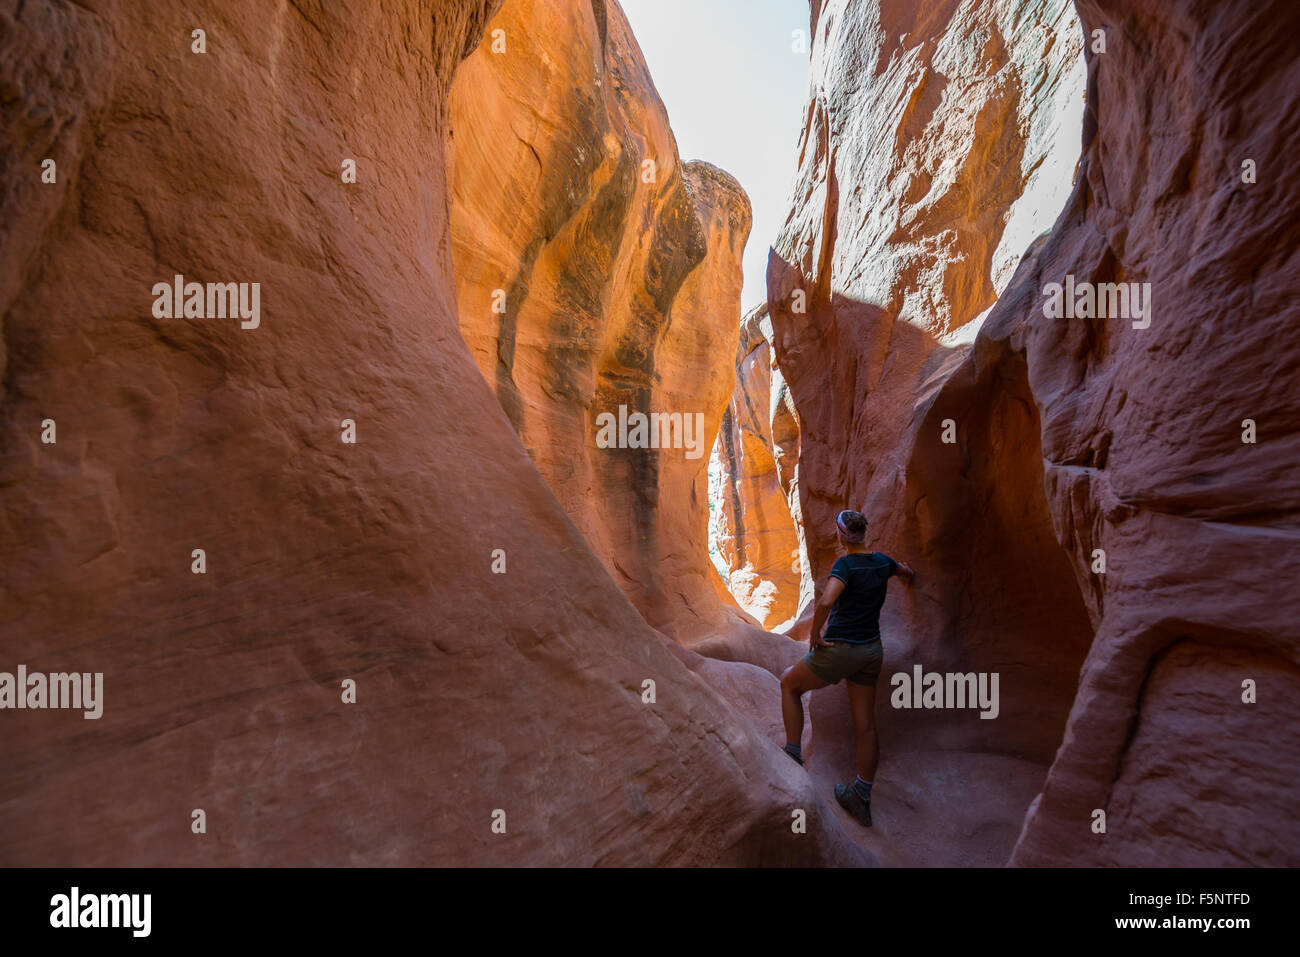 A woman admires the warm light in Peekaboo Gulch in the Escalante Canyons of Grand Staircase Escalante National Monument, Utah. Stock Photo